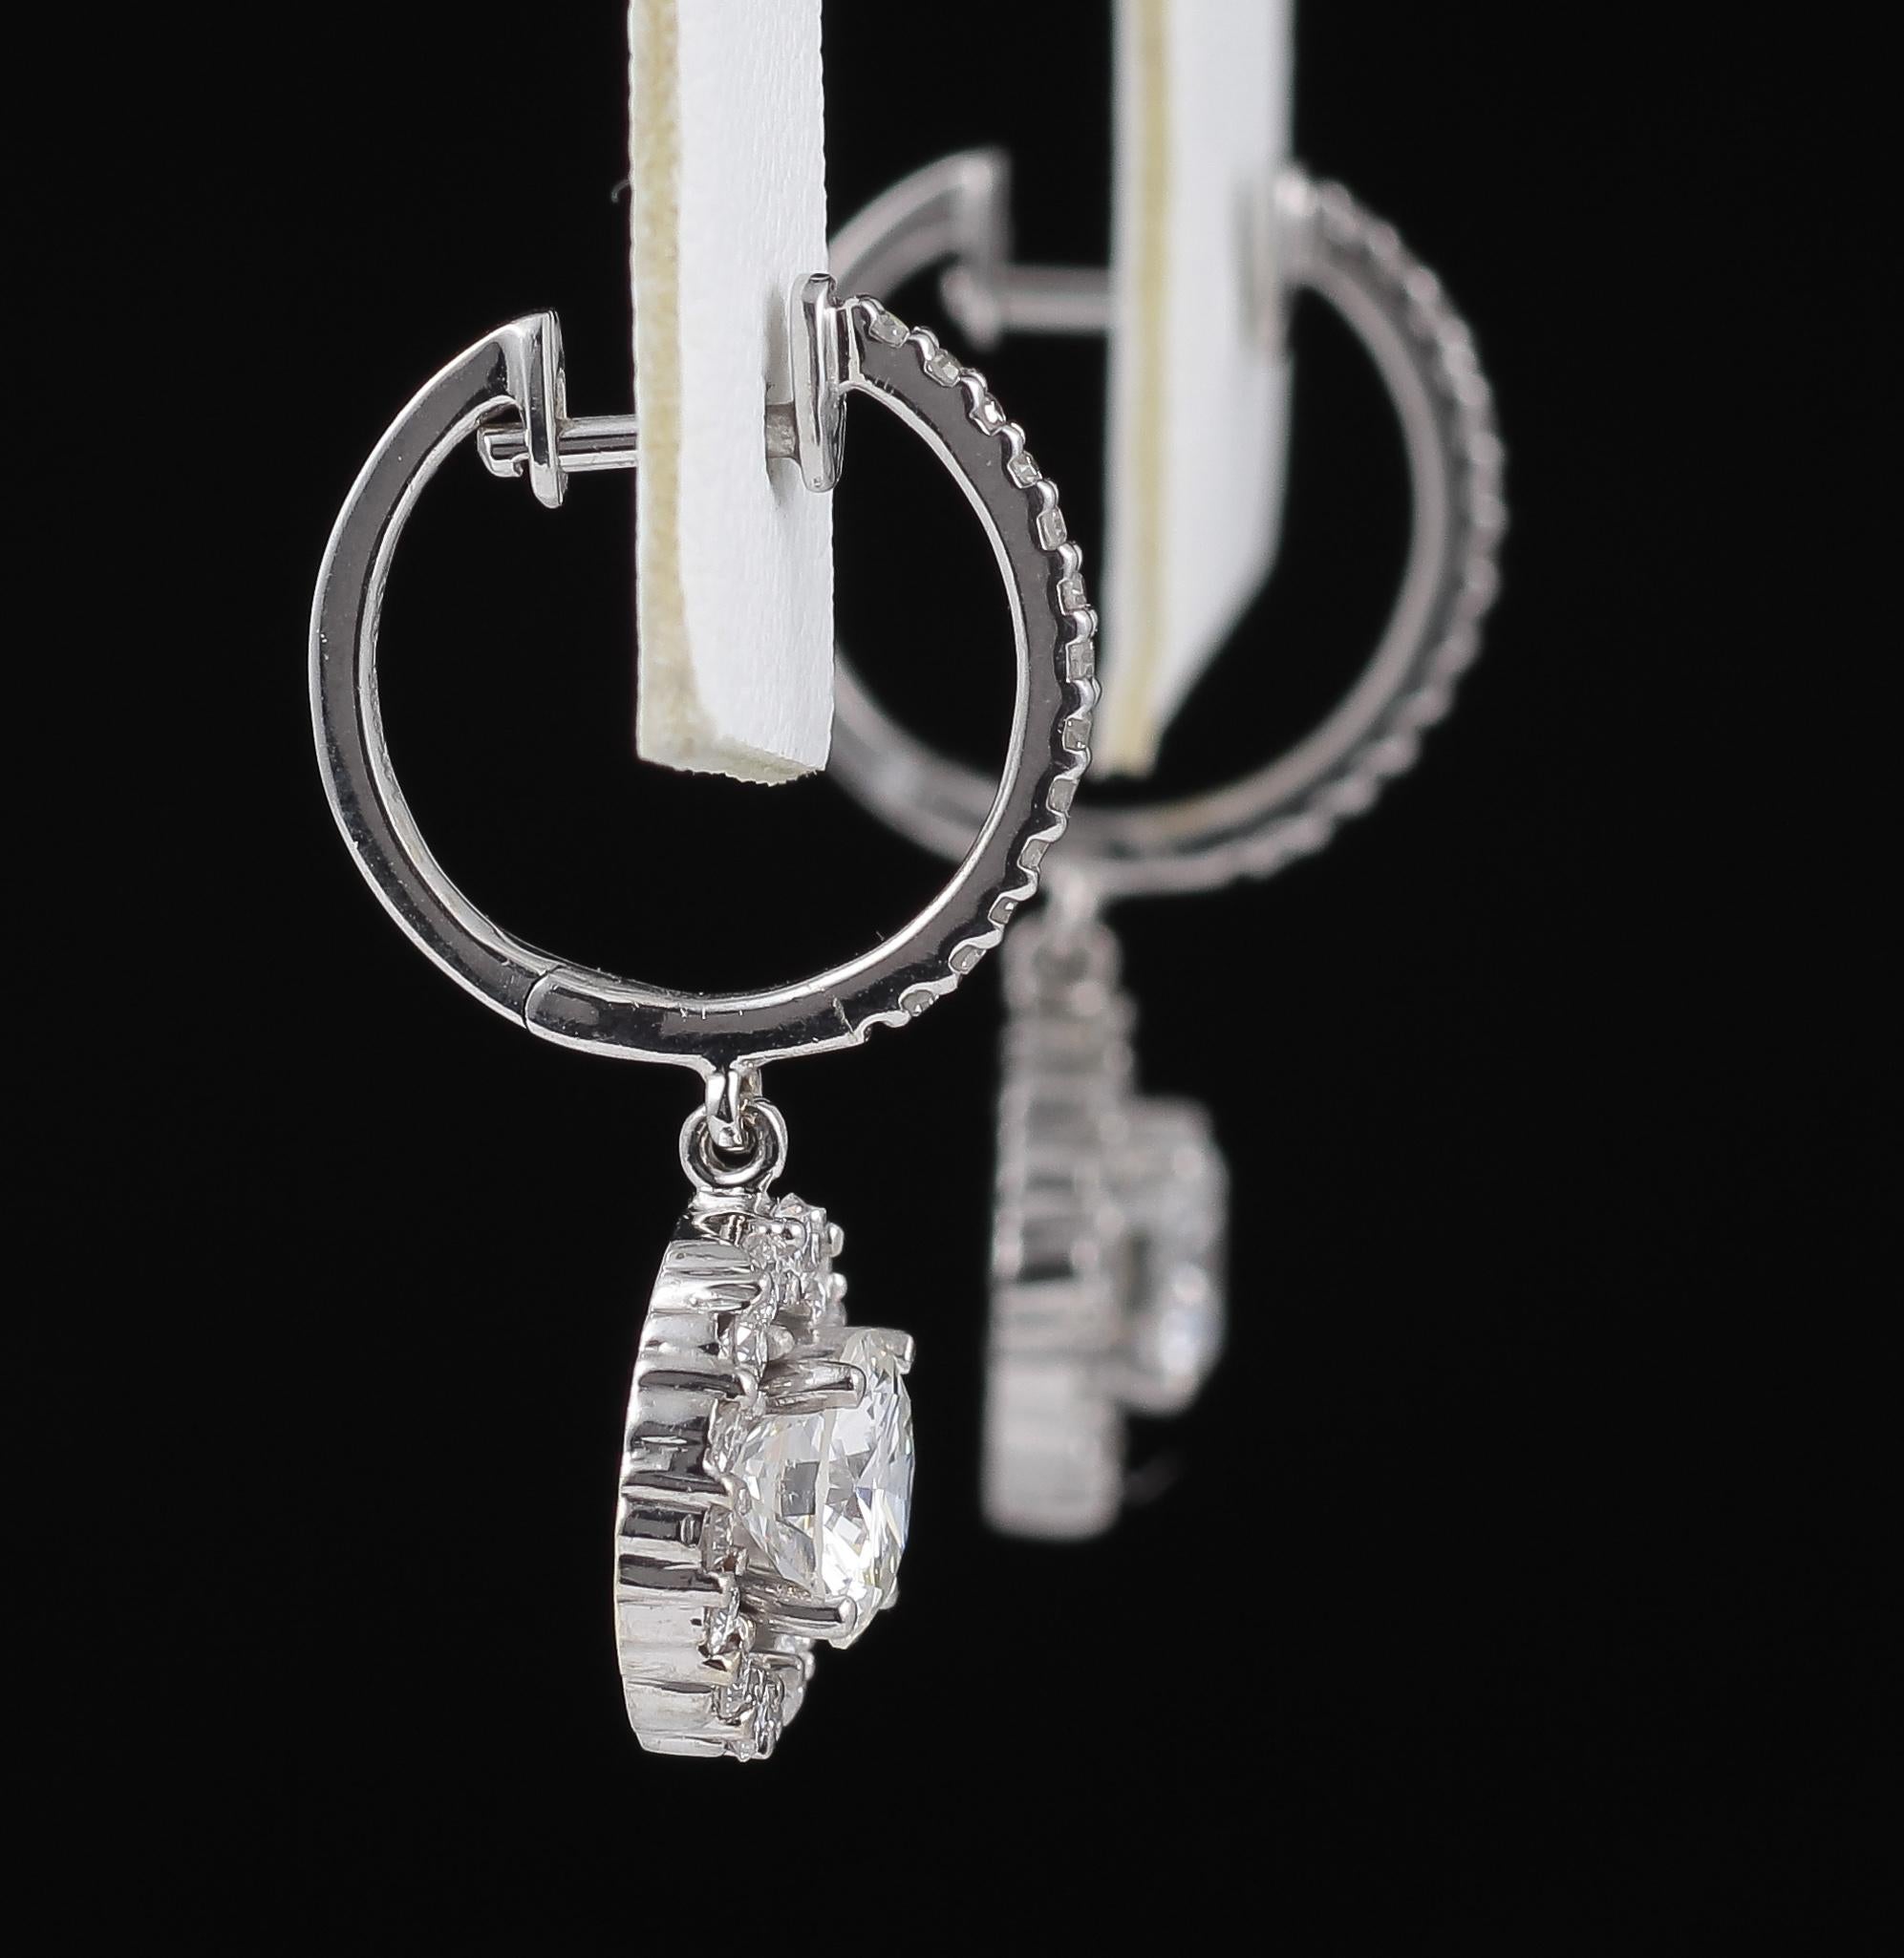 These are a stunning pair of  Diamond Halo Dangling Earrings fabricated in 14 Karat White Gold. These earrings feature a prong set Round Brilliant Cut Diamond, approximately 0.70 Carat at the center of a halo of  sparkling diamonds. The Diamonds are